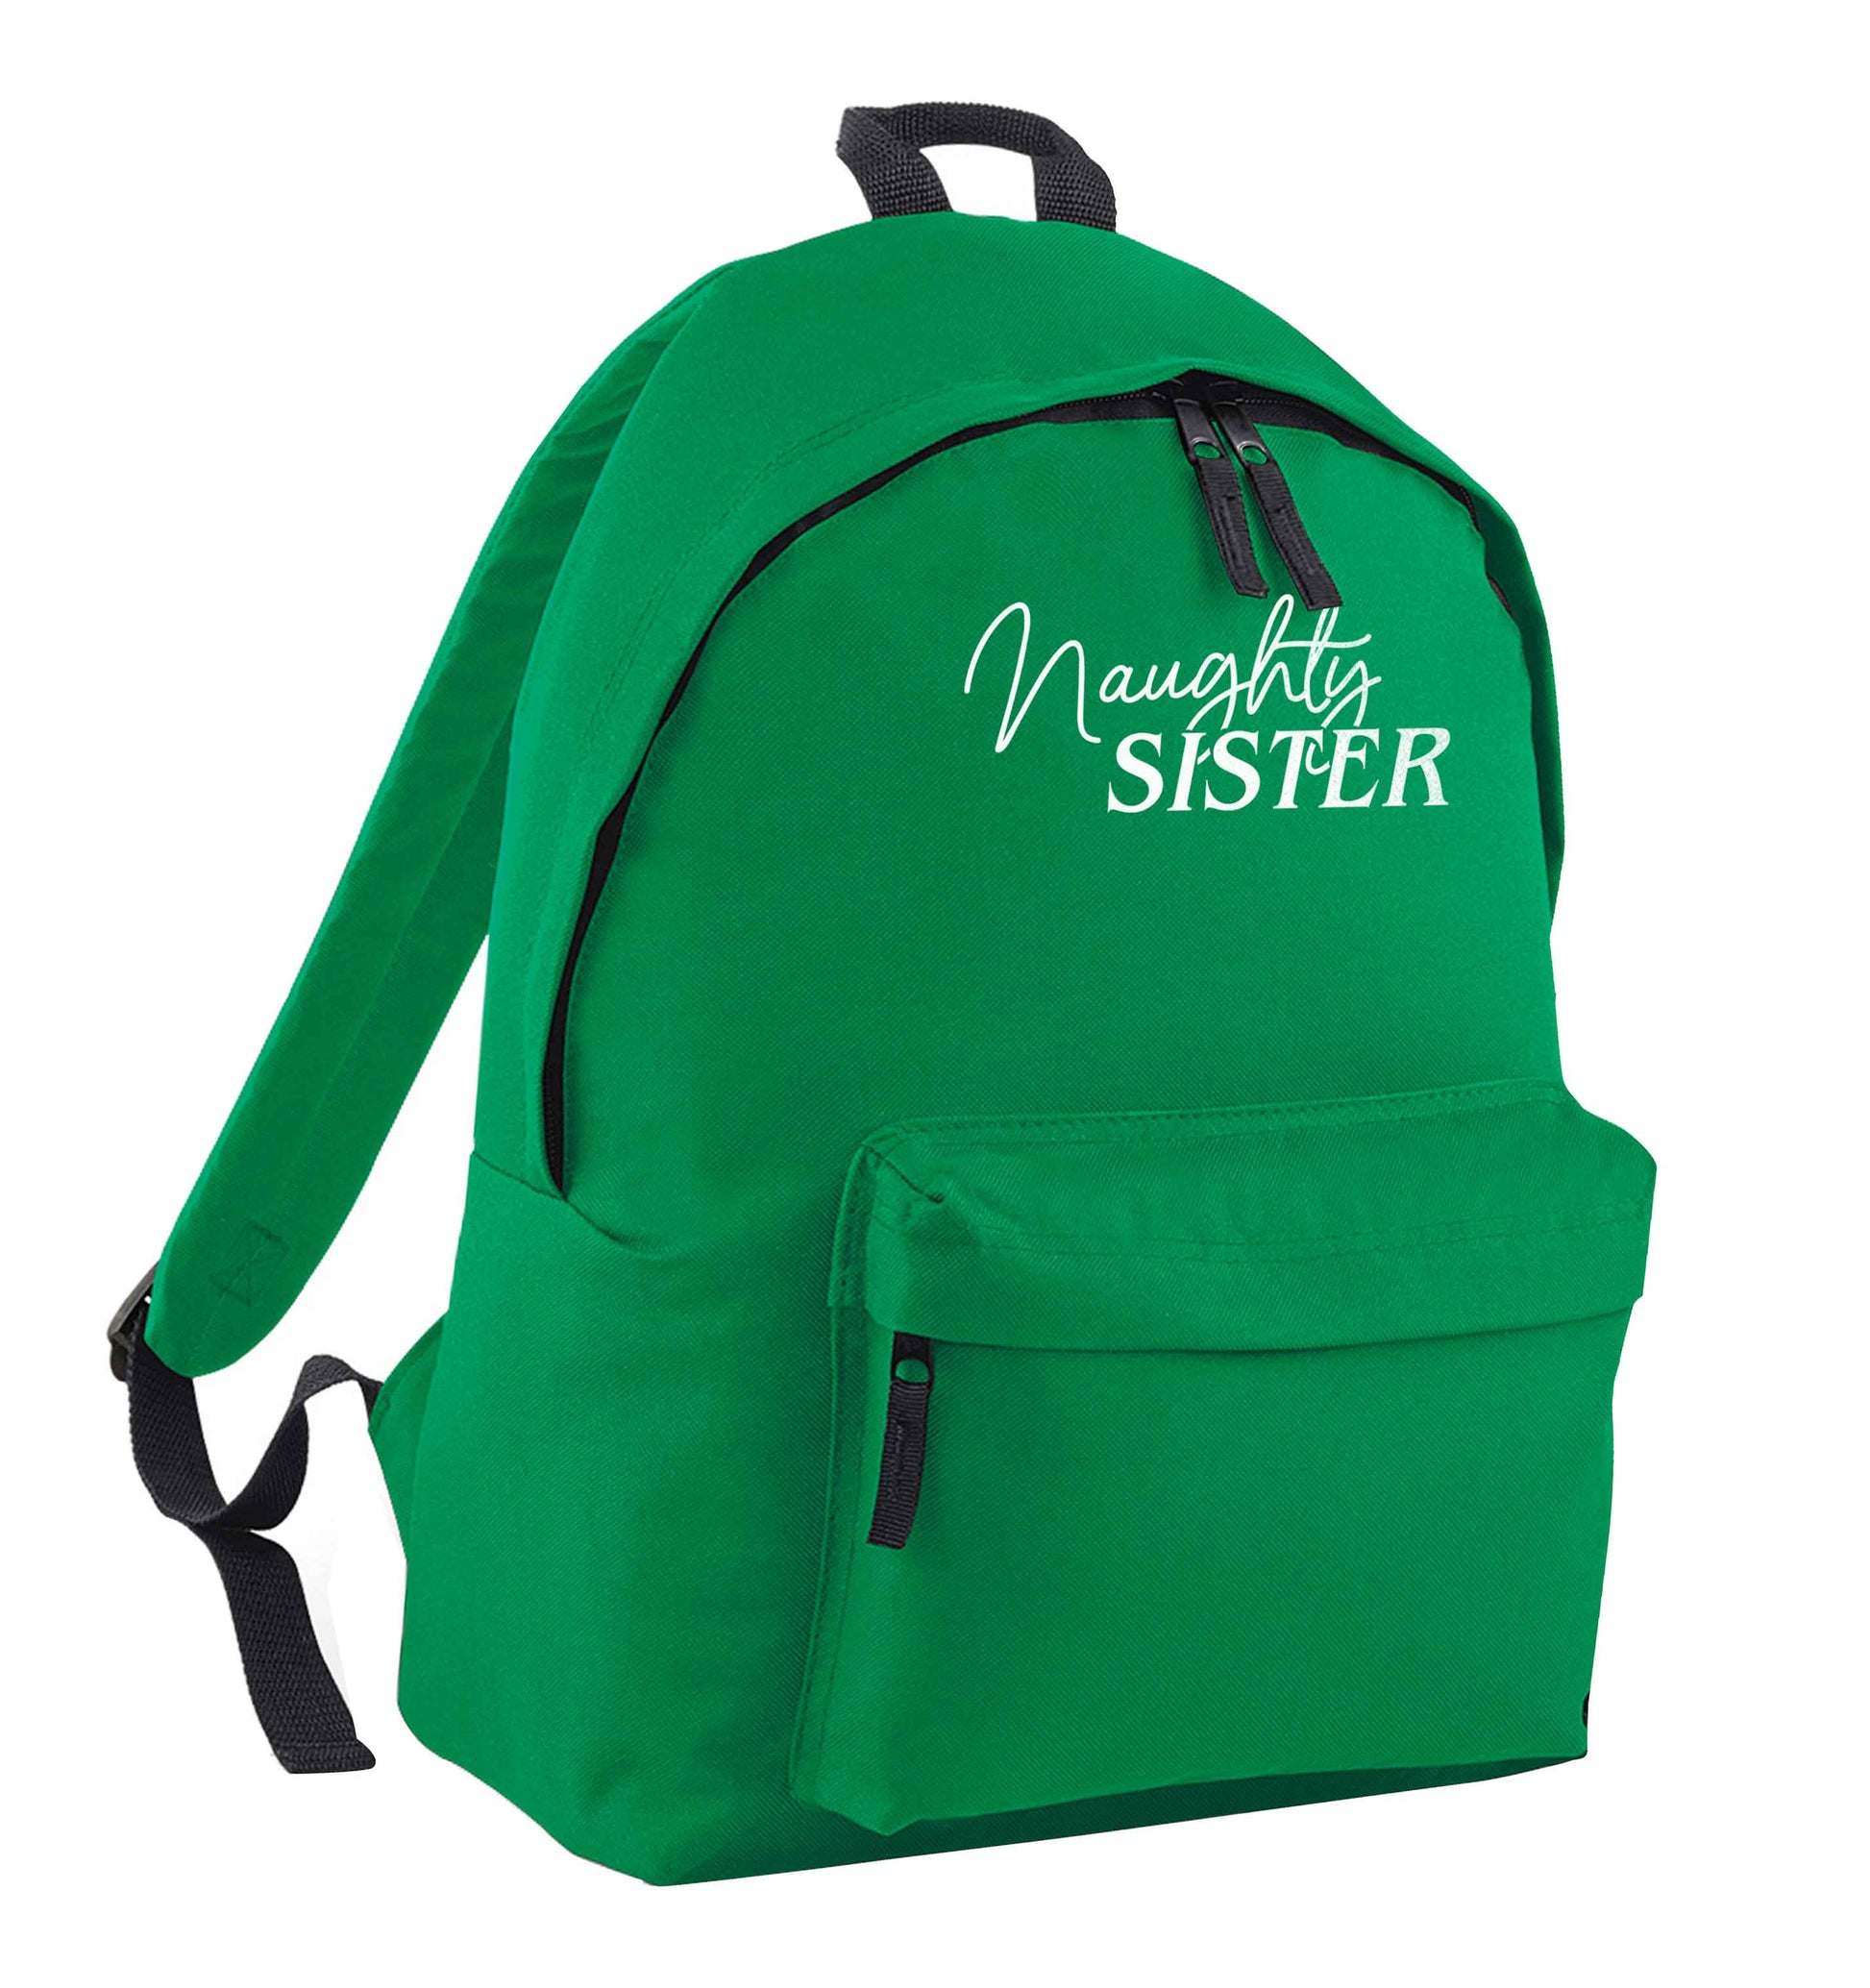 Naughty Sister green adults backpack